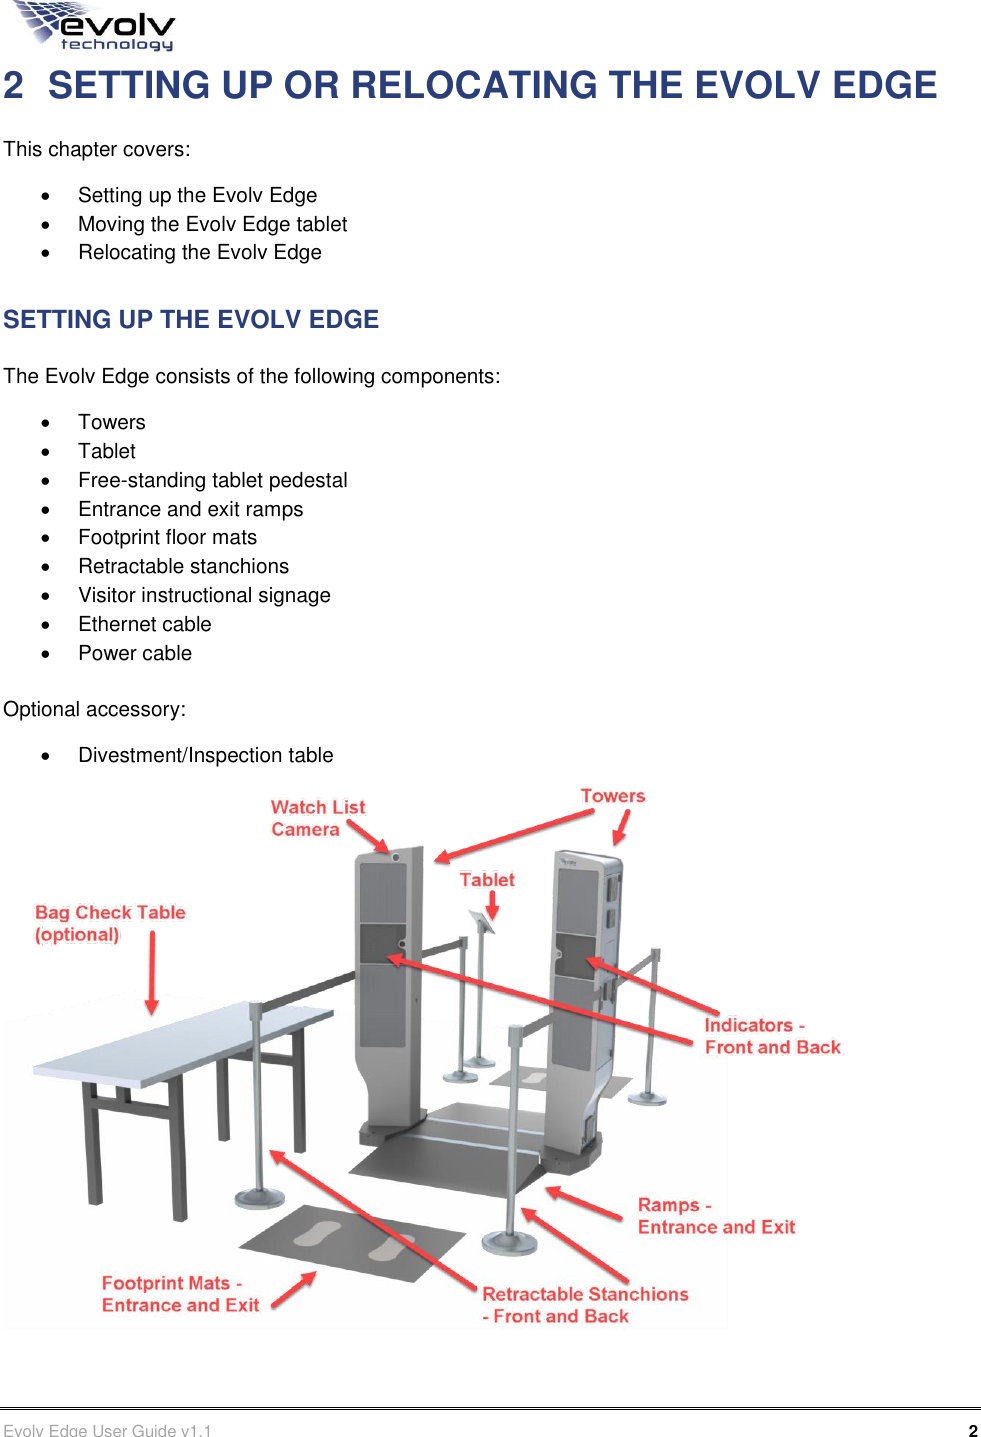      Evolv Edge User Guide v1.1      2 Part Number: 500-00003 2  SETTING UP OR RELOCATING THE EVOLV EDGE This chapter covers:   Setting up the Evolv Edge   Moving the Evolv Edge tablet   Relocating the Evolv Edge SETTING UP THE EVOLV EDGE The Evolv Edge consists of the following components:   Towers   Tablet   Free-standing tablet pedestal   Entrance and exit ramps   Footprint floor mats   Retractable stanchions   Visitor instructional signage   Ethernet cable   Power cable  Optional accessory:   Divestment/Inspection table  